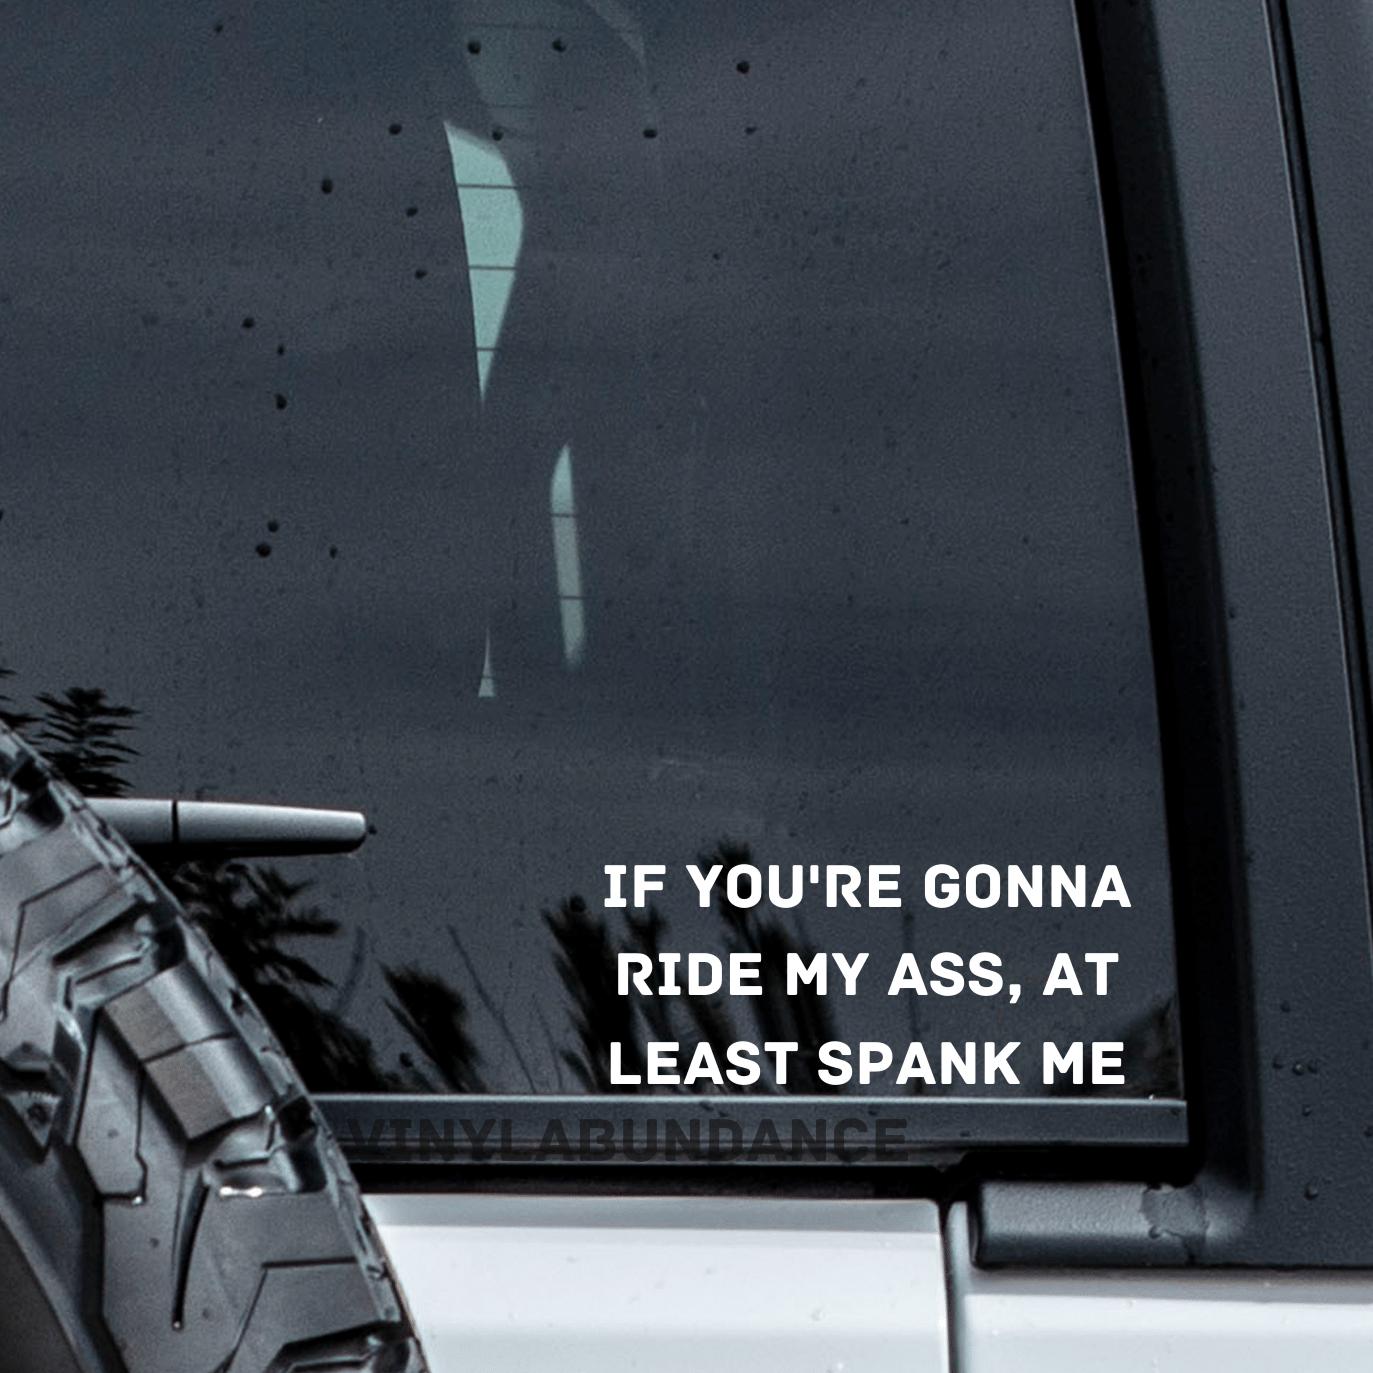 If you're gonna ride my ass, at least spank me vinyl window decal.